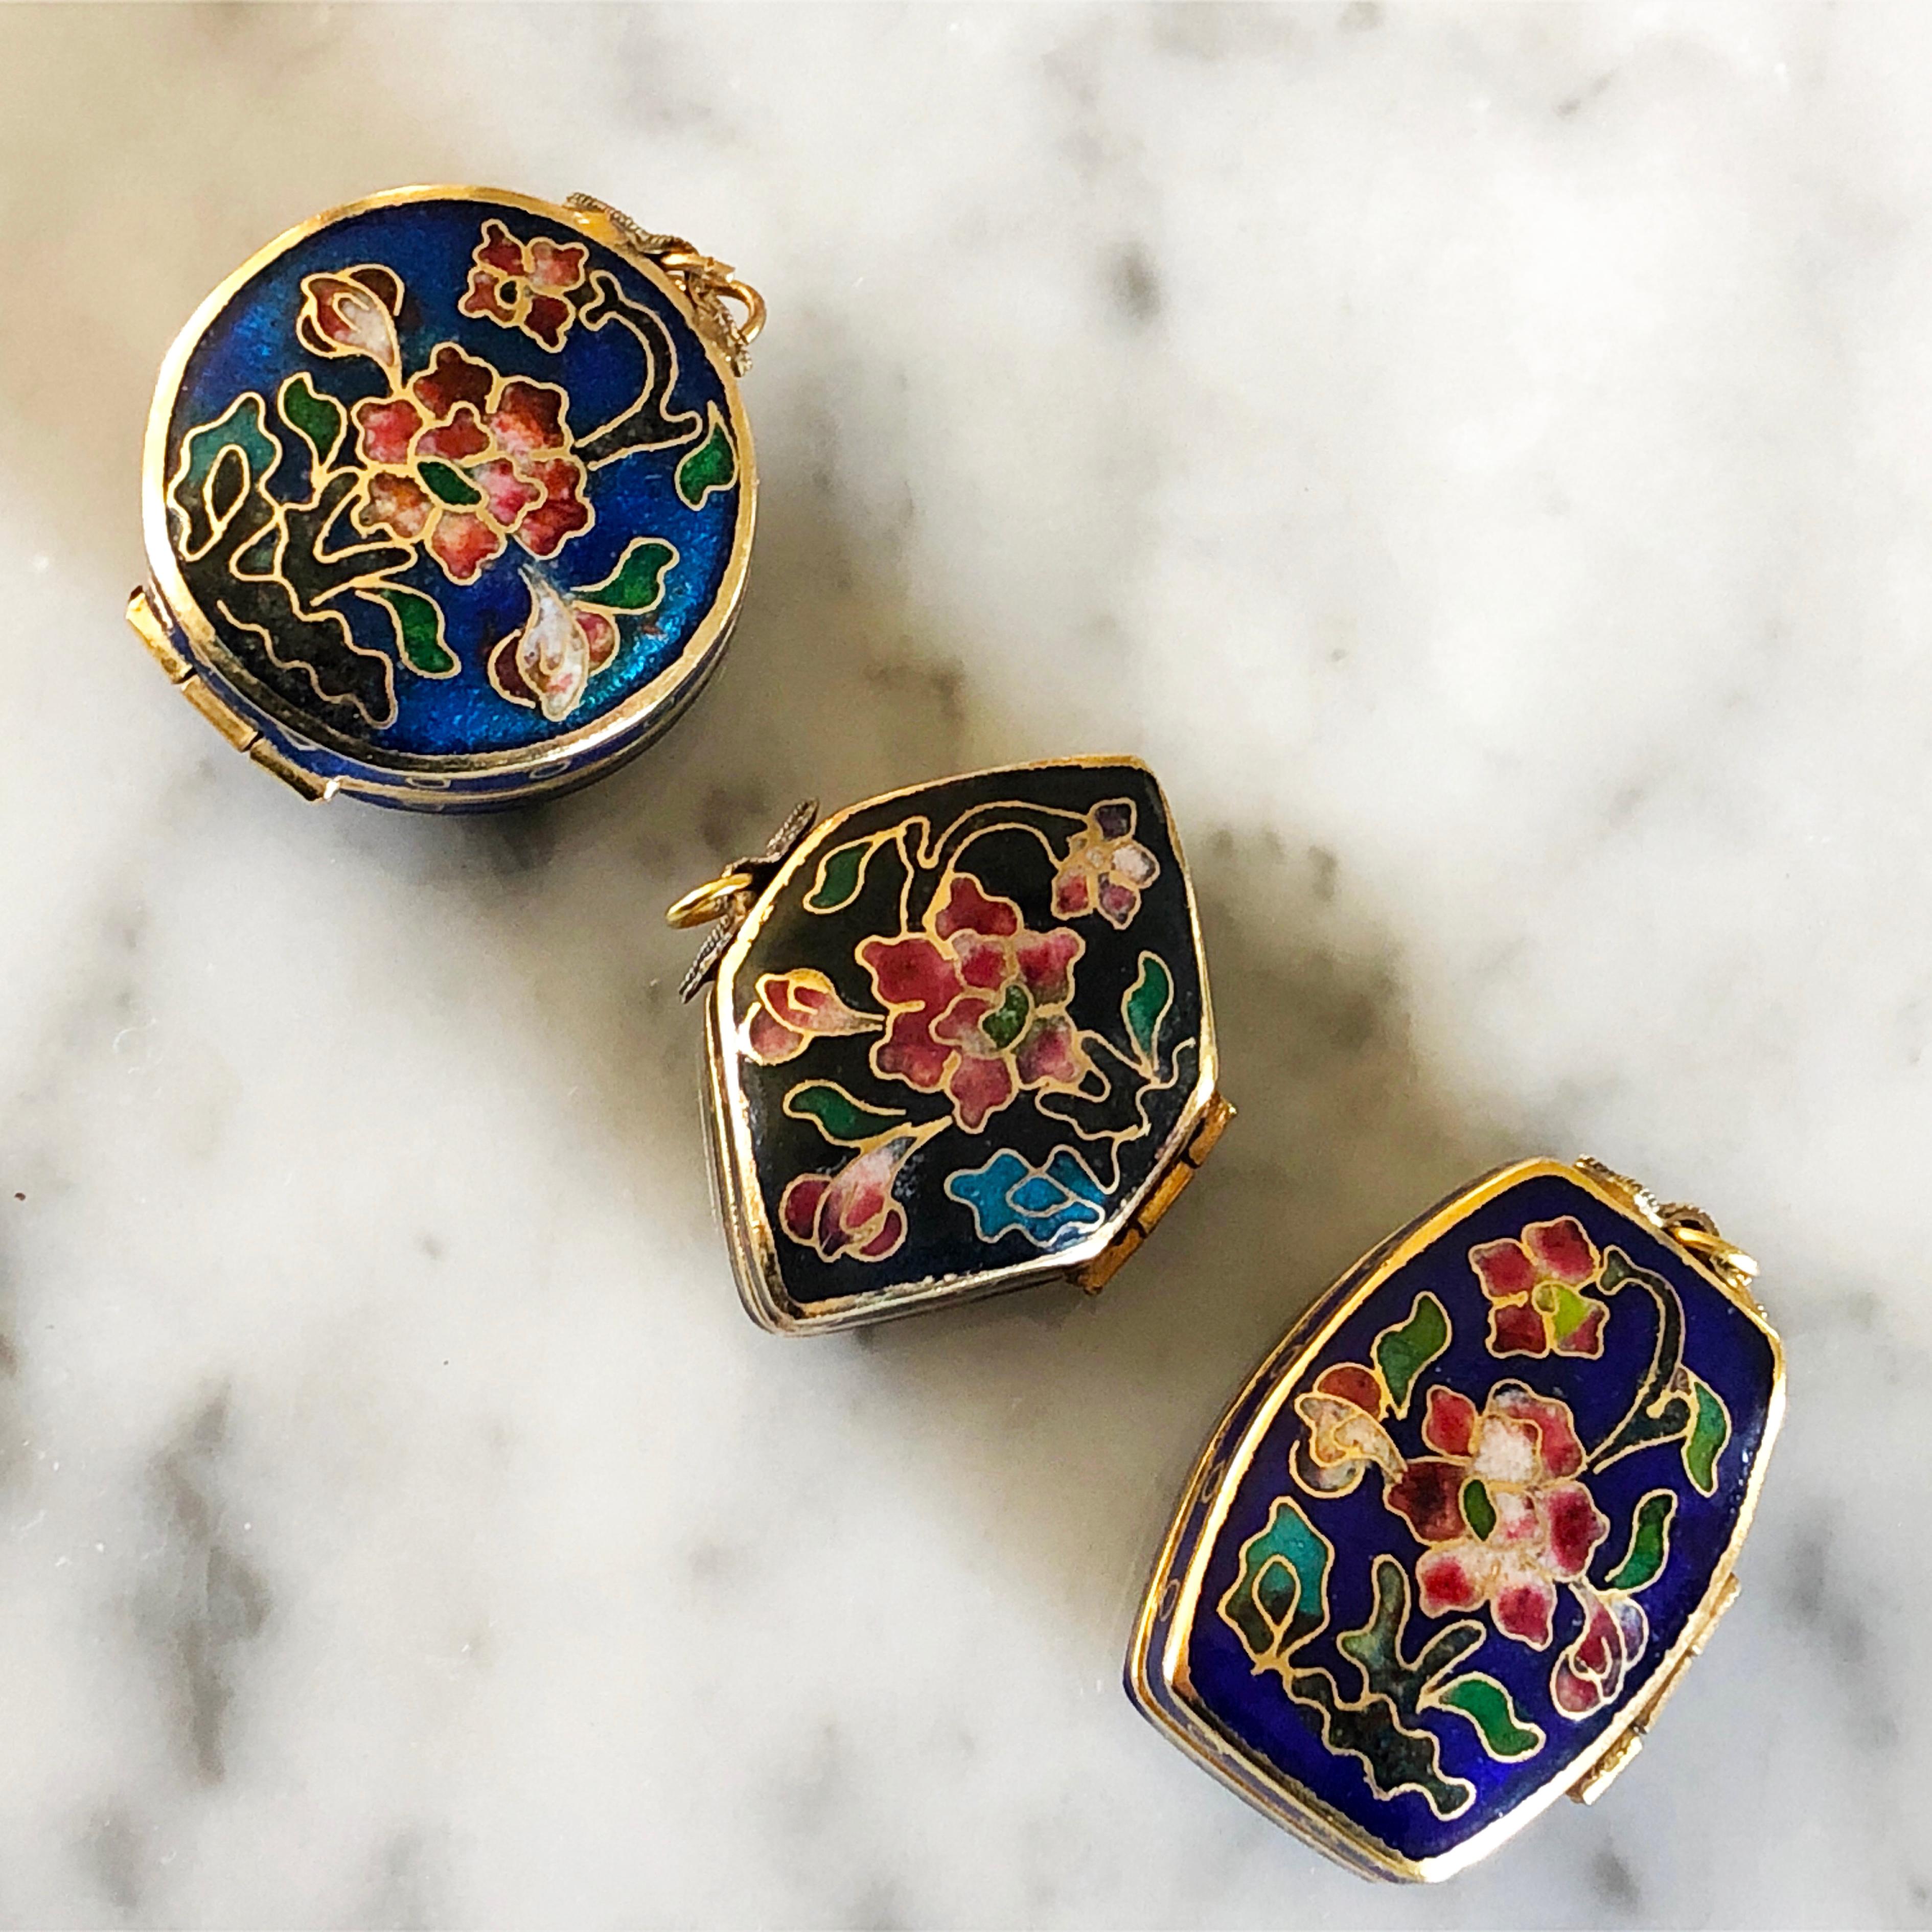 1930 Chinese Export Cloisonné Pill Boxes Collection 8